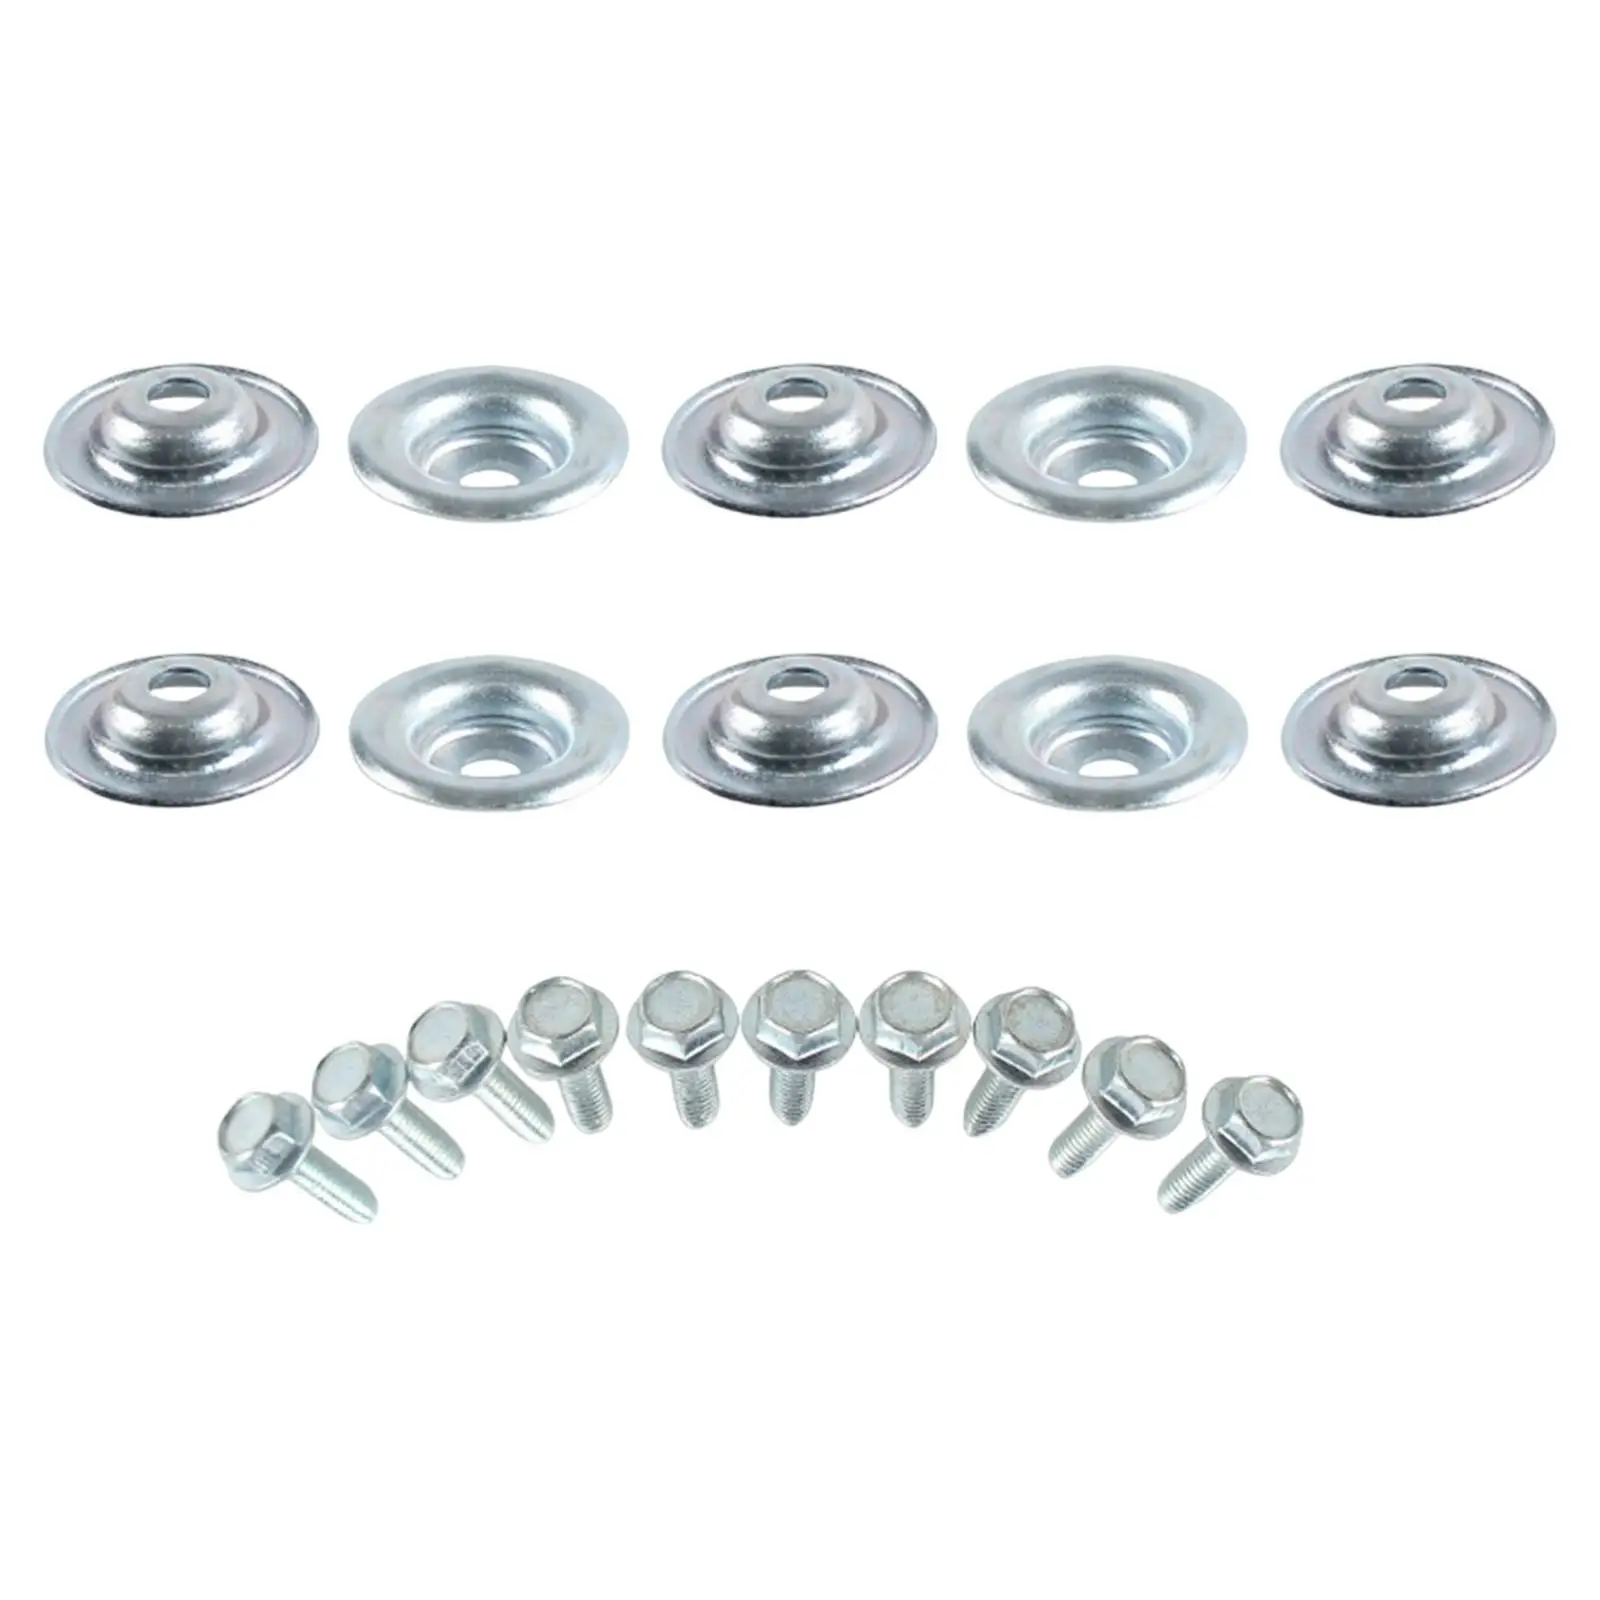 Bolts & Washers Set for UTV Fit for RS1 RZR 500 1000